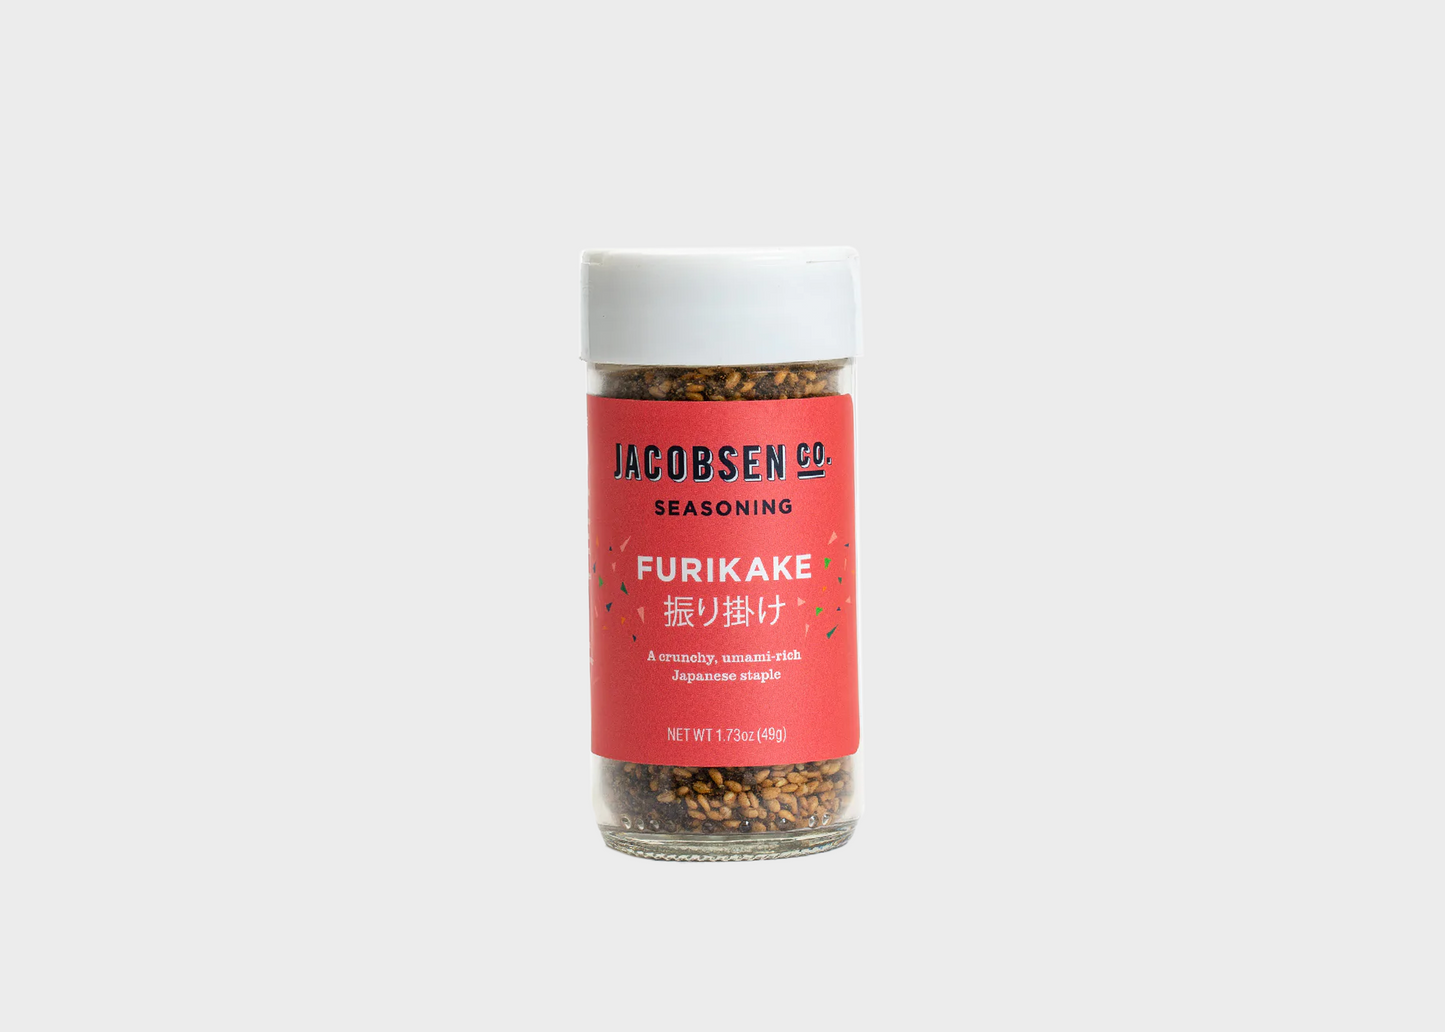 Furikake Seasoning bottle by Jacobsen Salt Co. with a bright red label and umami-rich seasoning inside.